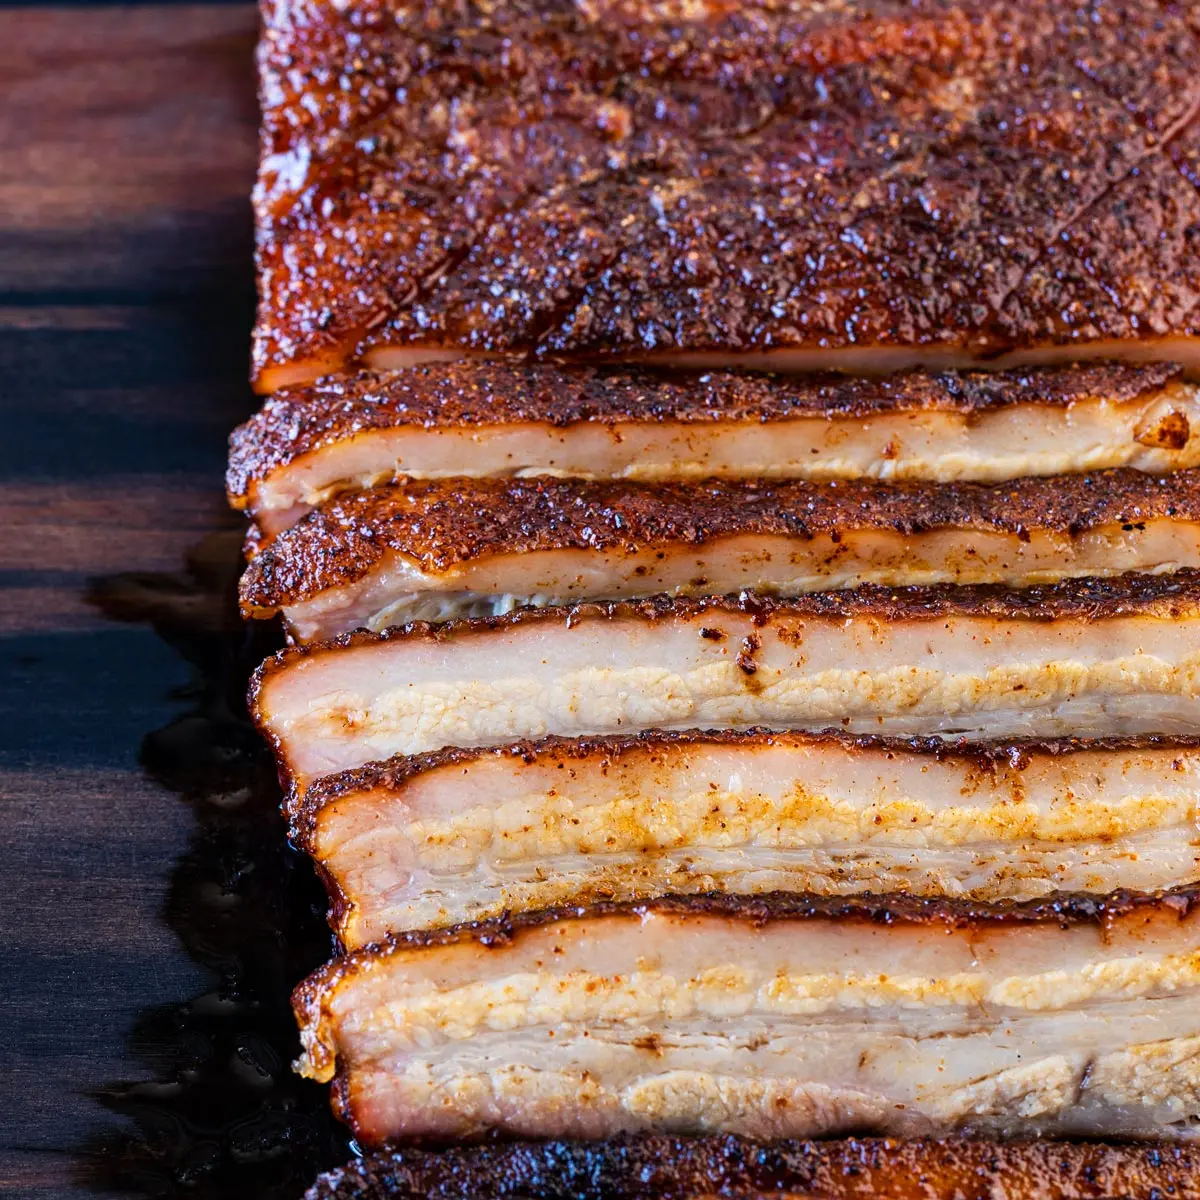 smoked pork belly brisket - How long does it take to smoke a pork belly like a brisket